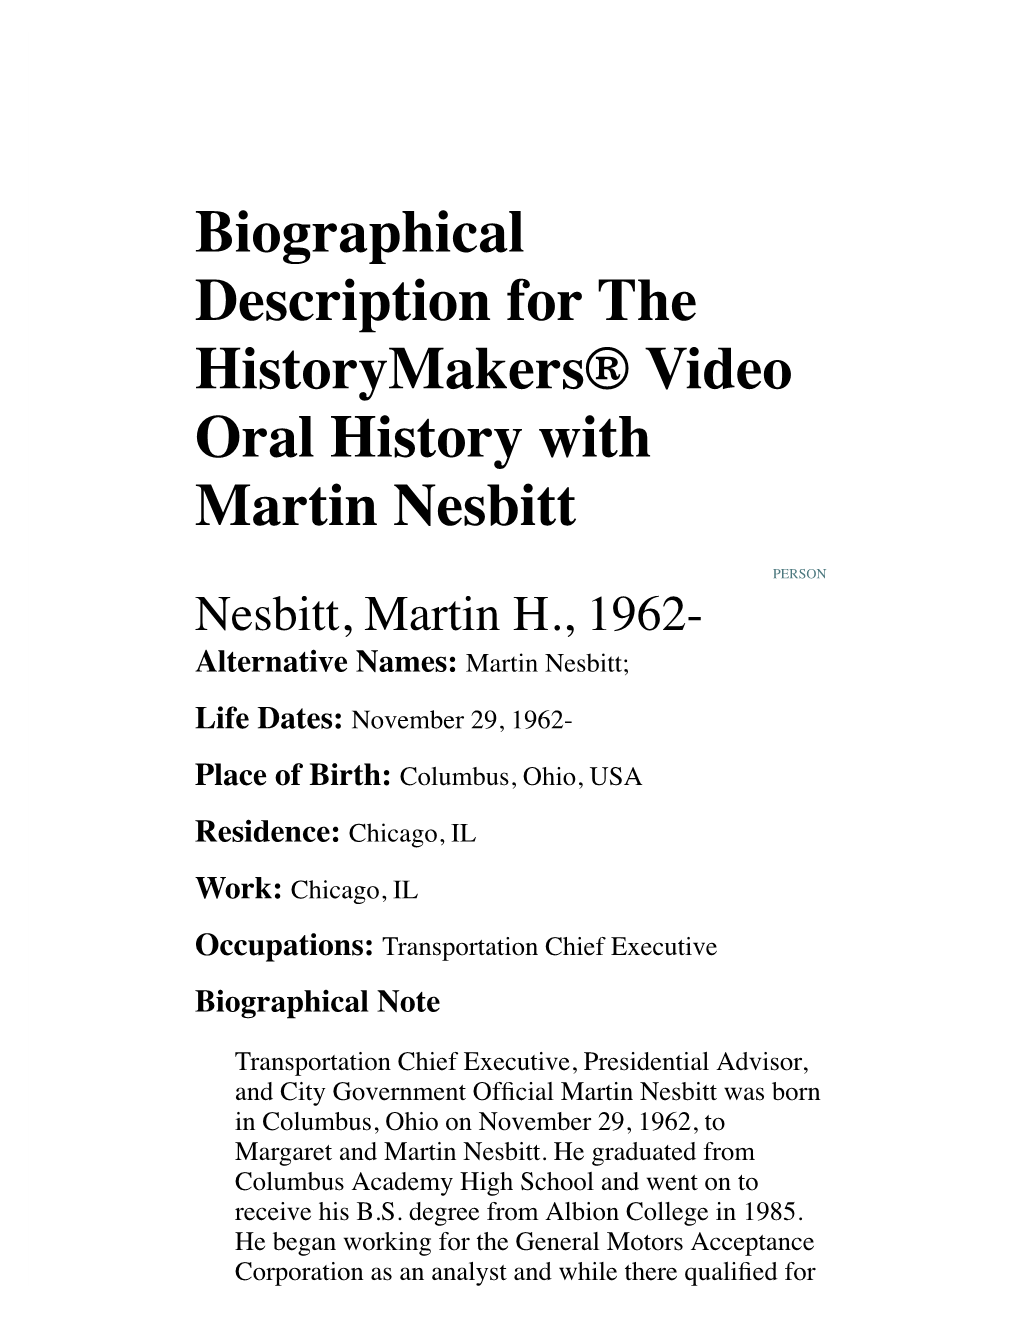 Biographical Description for the Historymakers® Video Oral History with Martin Nesbitt